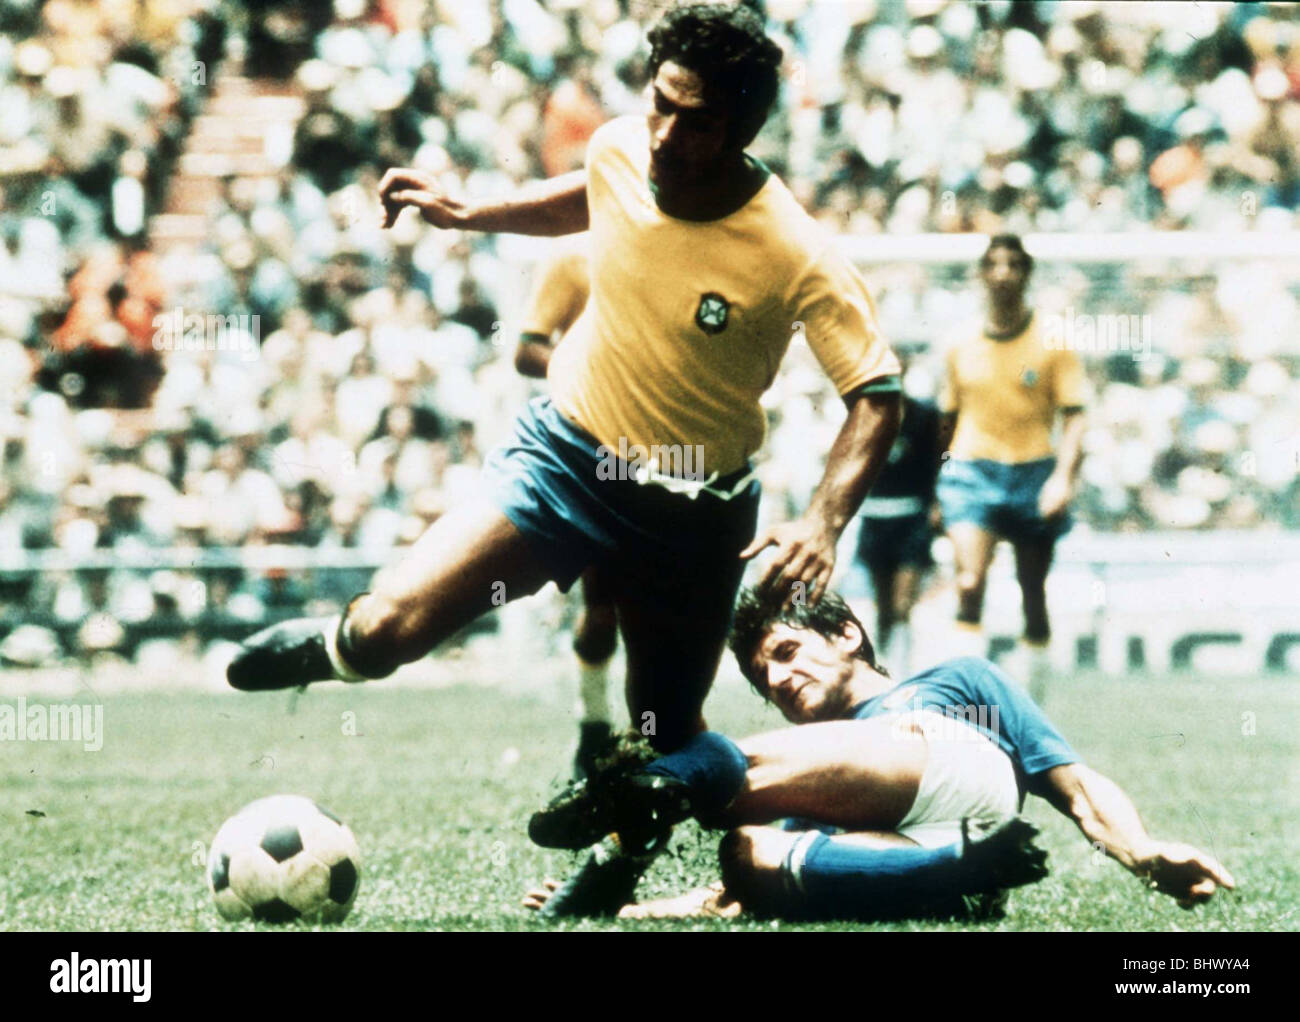 World Cup Final 1970 Brazil 4 Italy 1 Azteca, Mexico City Rivelino tackled late from behind by Italian defender. Mexico Stock Photo